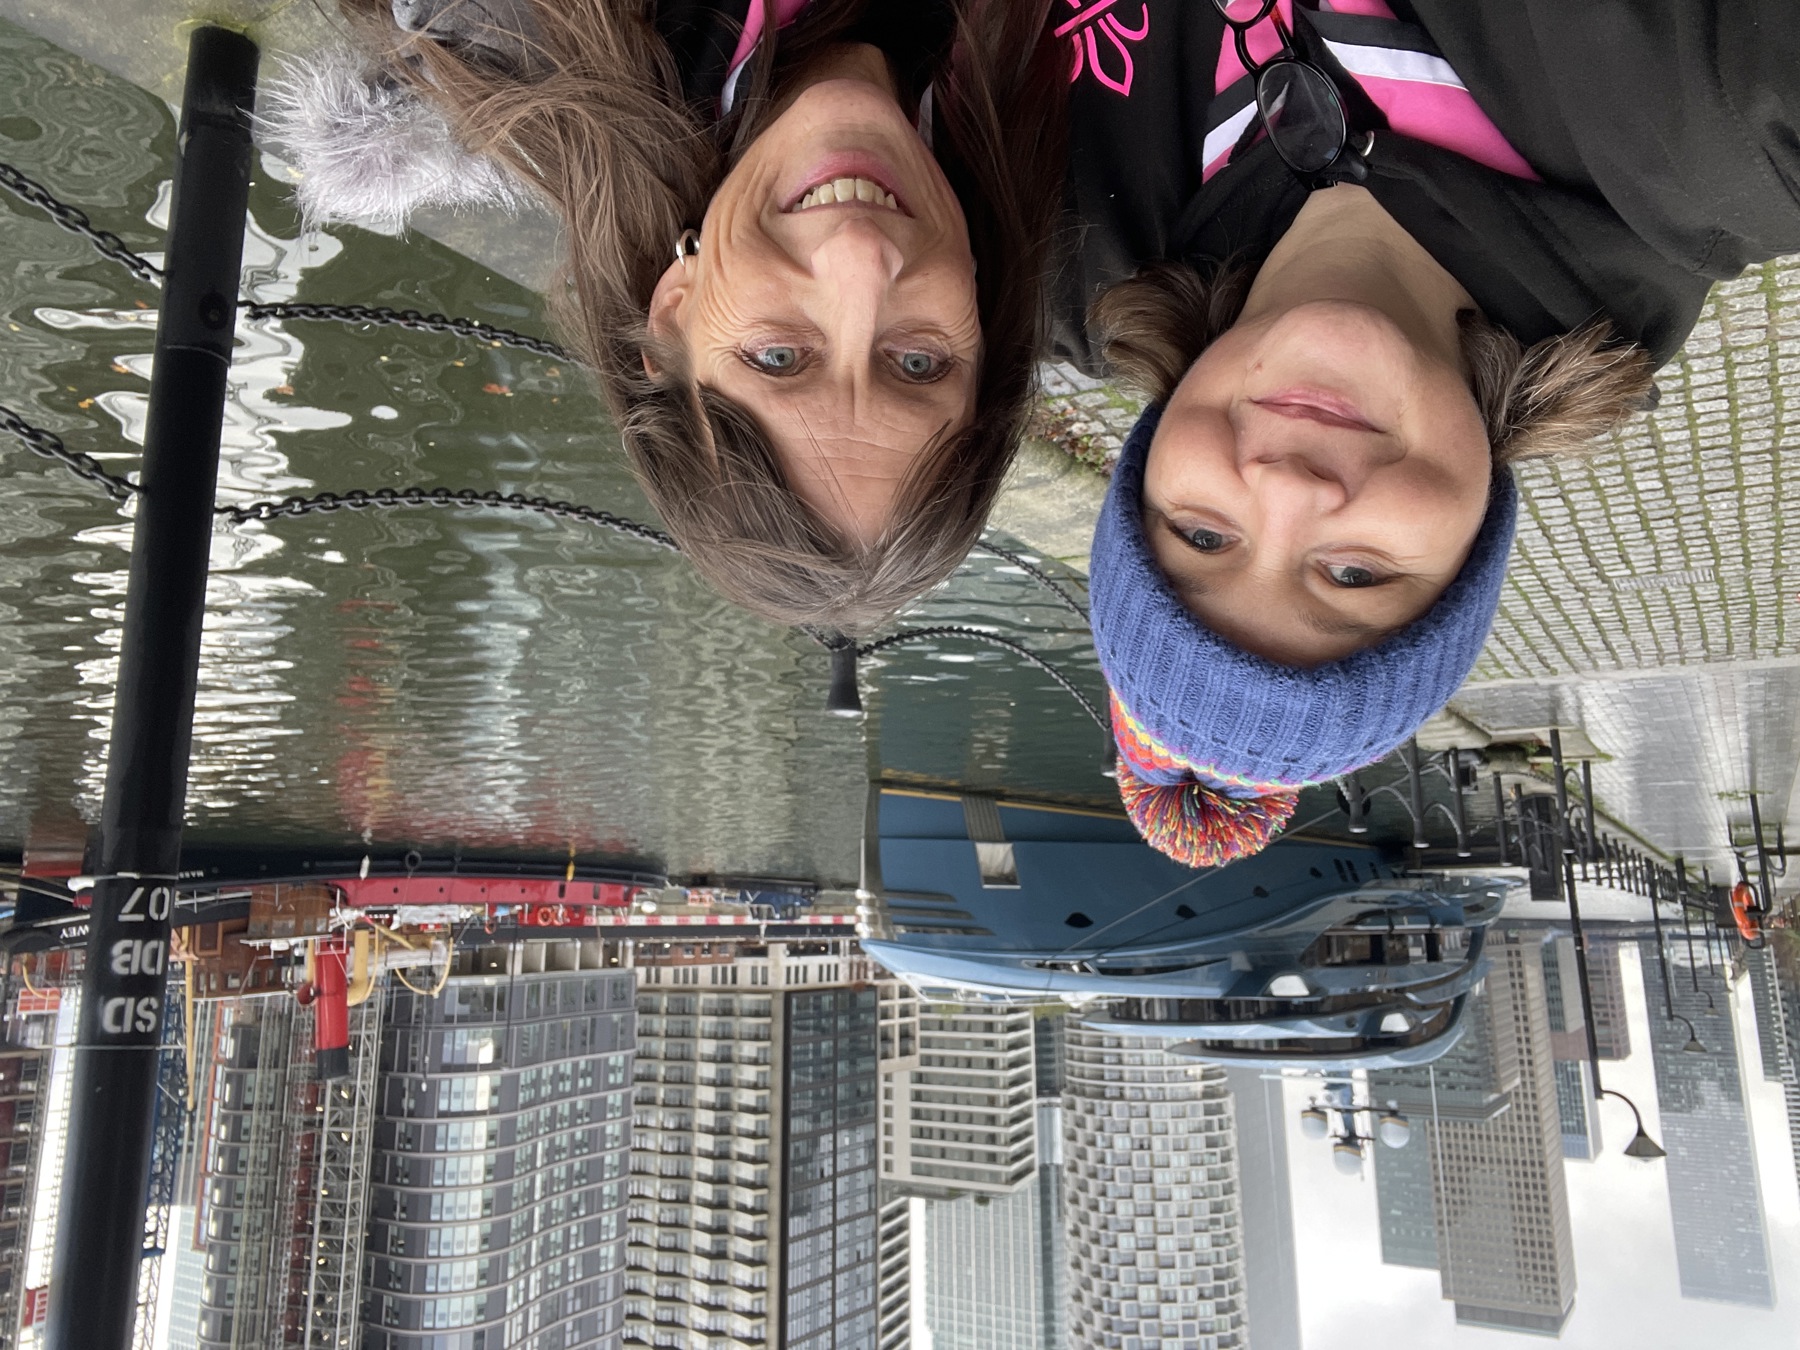 Two women are stood on pavement with a river next to them on the left. There are two boats in the background on the water and skyscrapers the other side of the river. The two women are stood close together, Emma on the right wearing a hot pink, black and white Scouts necker with a blue beanie hat on, and Teresa is on the left wearing a coat with a fluffy hood. They're both smiling at the camera